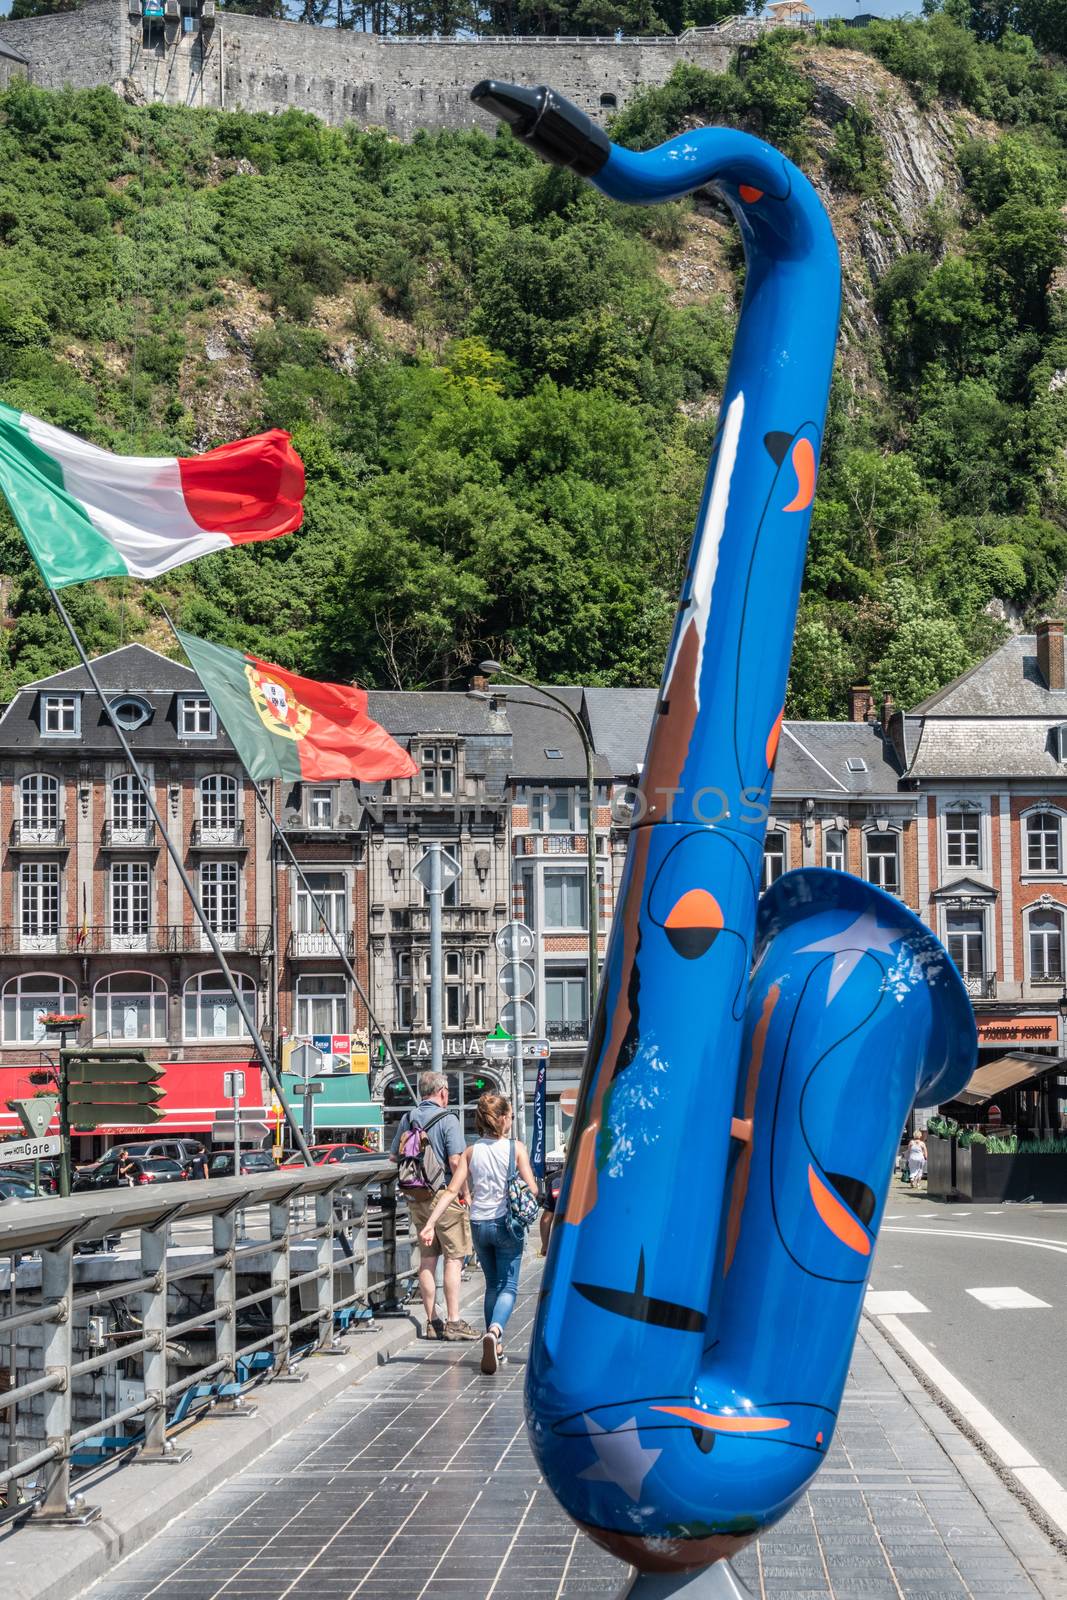 Blue Saxophone statue in Dinant, Belgium. by Claudine